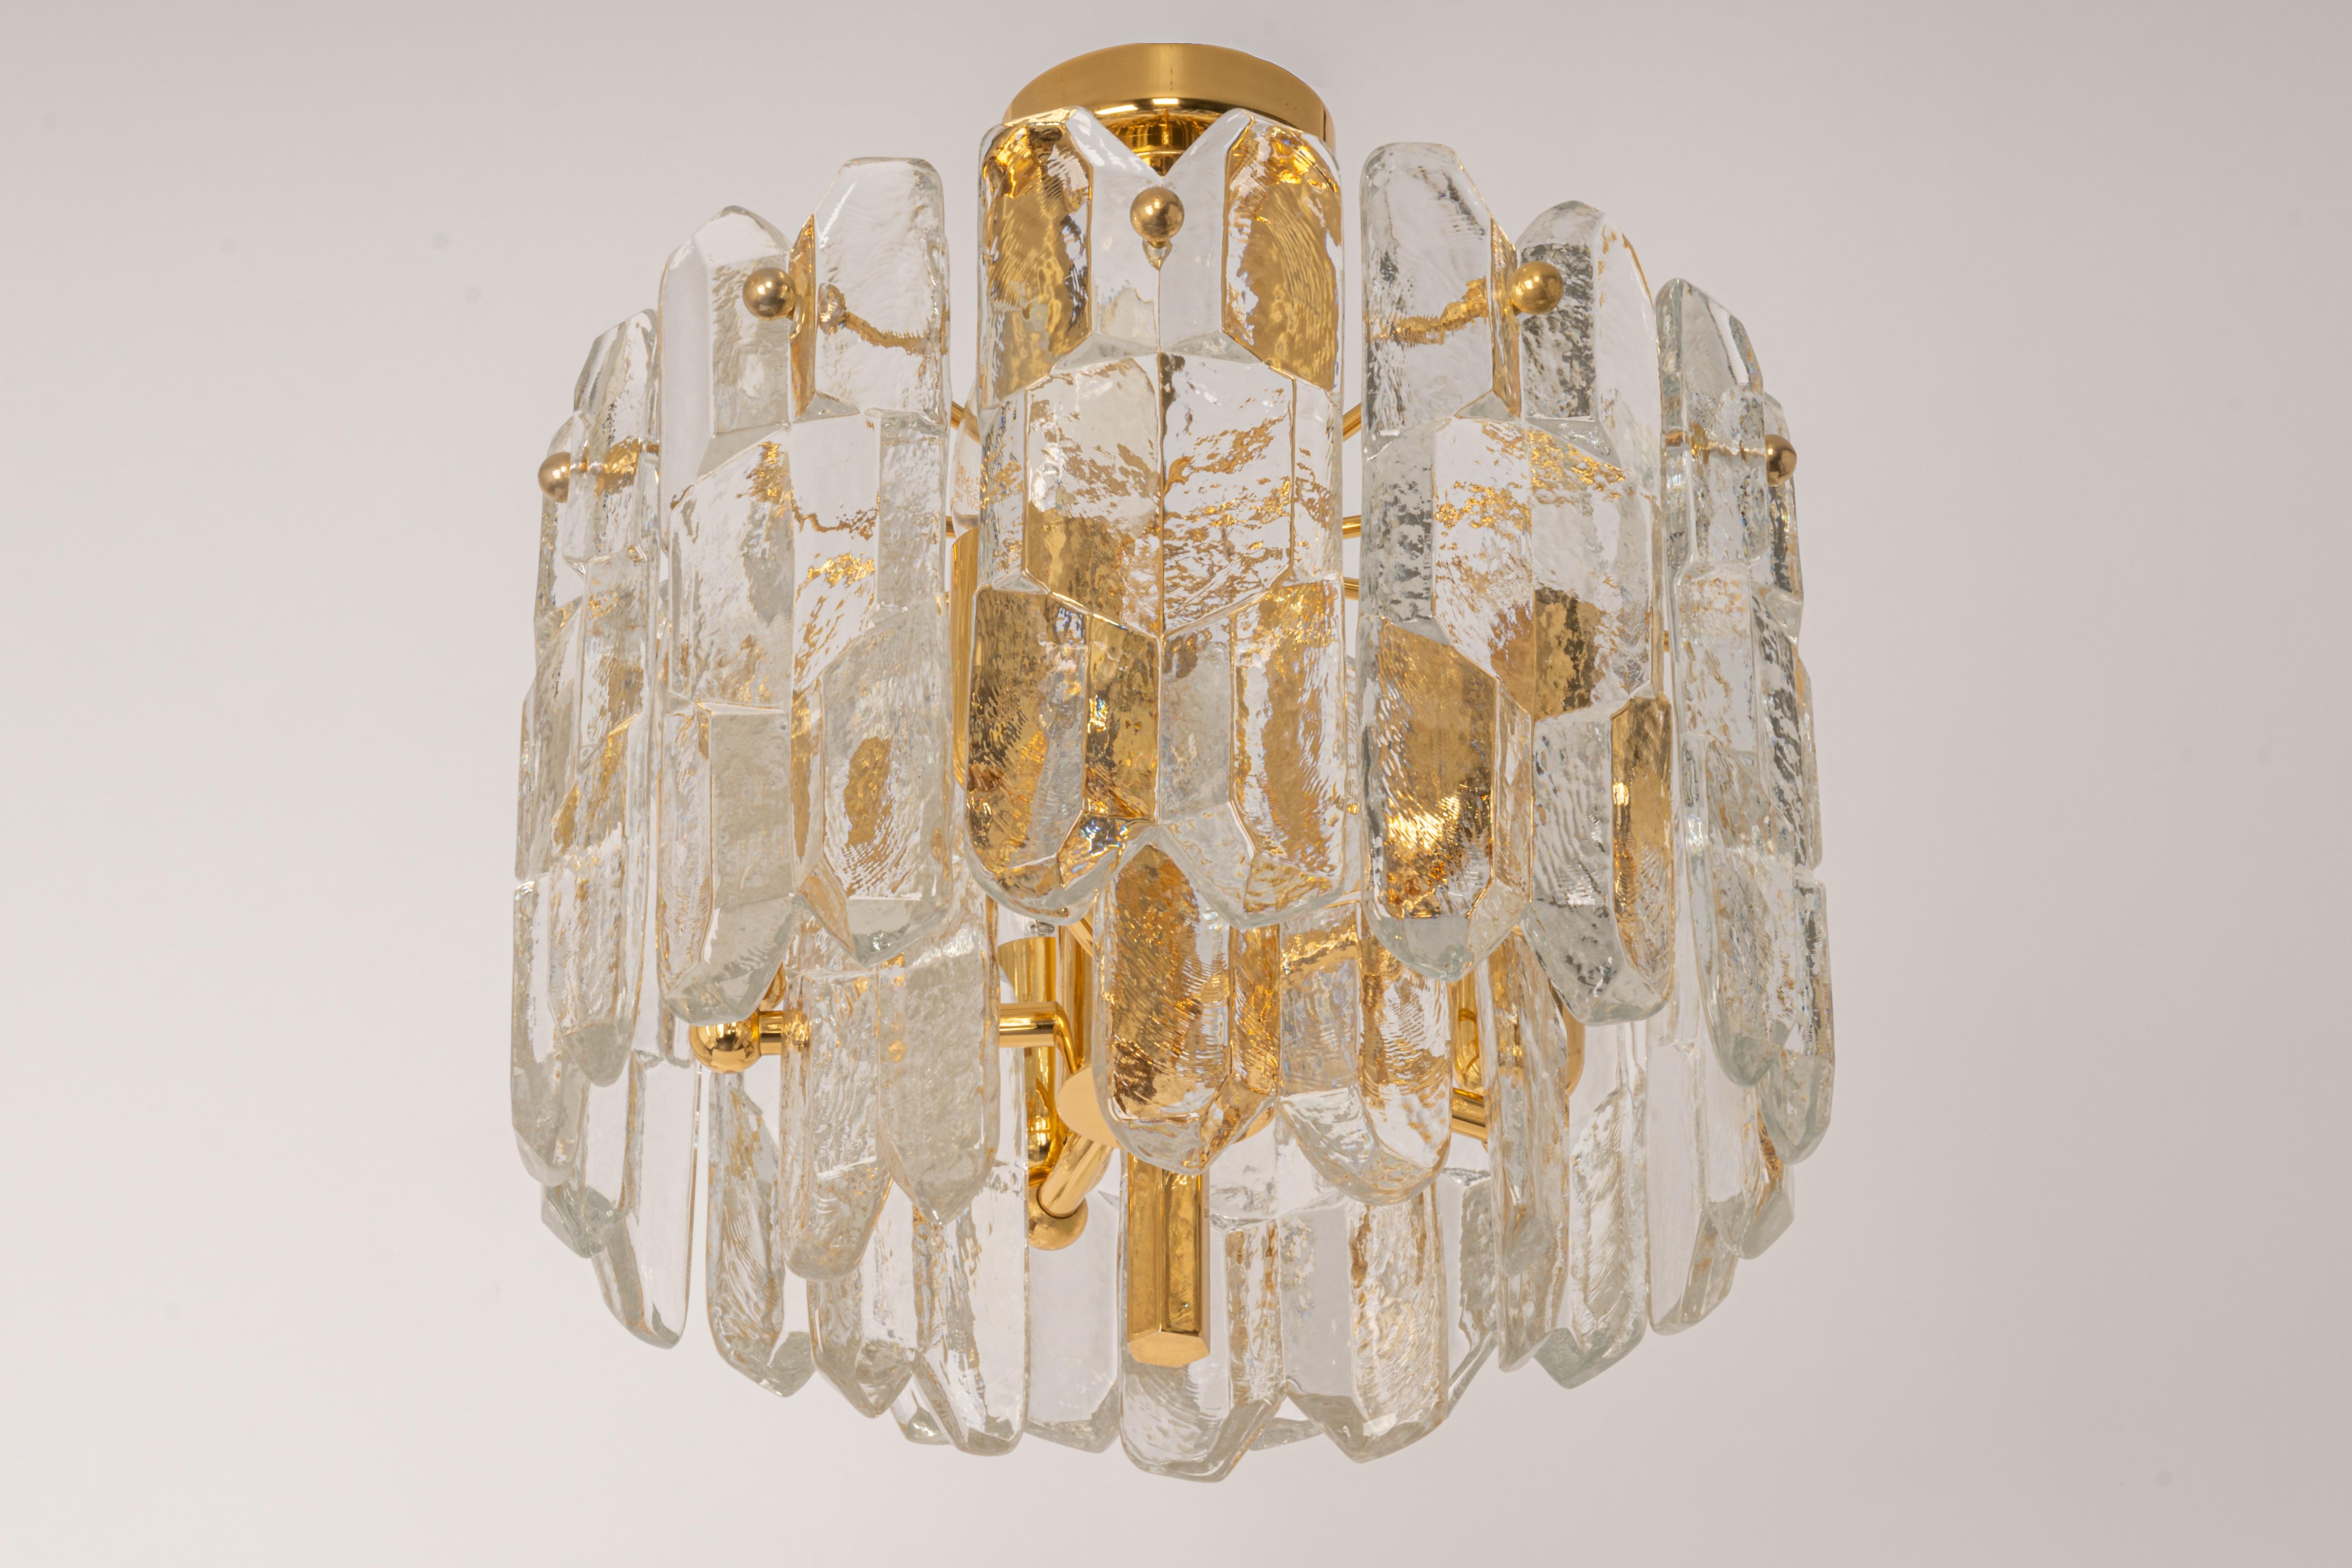 Wonderful gilt brass light fixture comprises 15 crystal Murano glass pieces on a gilded brass frame. Its made by Kalmar (Serie: Palazzo), Austria, manufactured, circa 1970-1979.

Two tiers structure gathering many structured glasses, beautifully